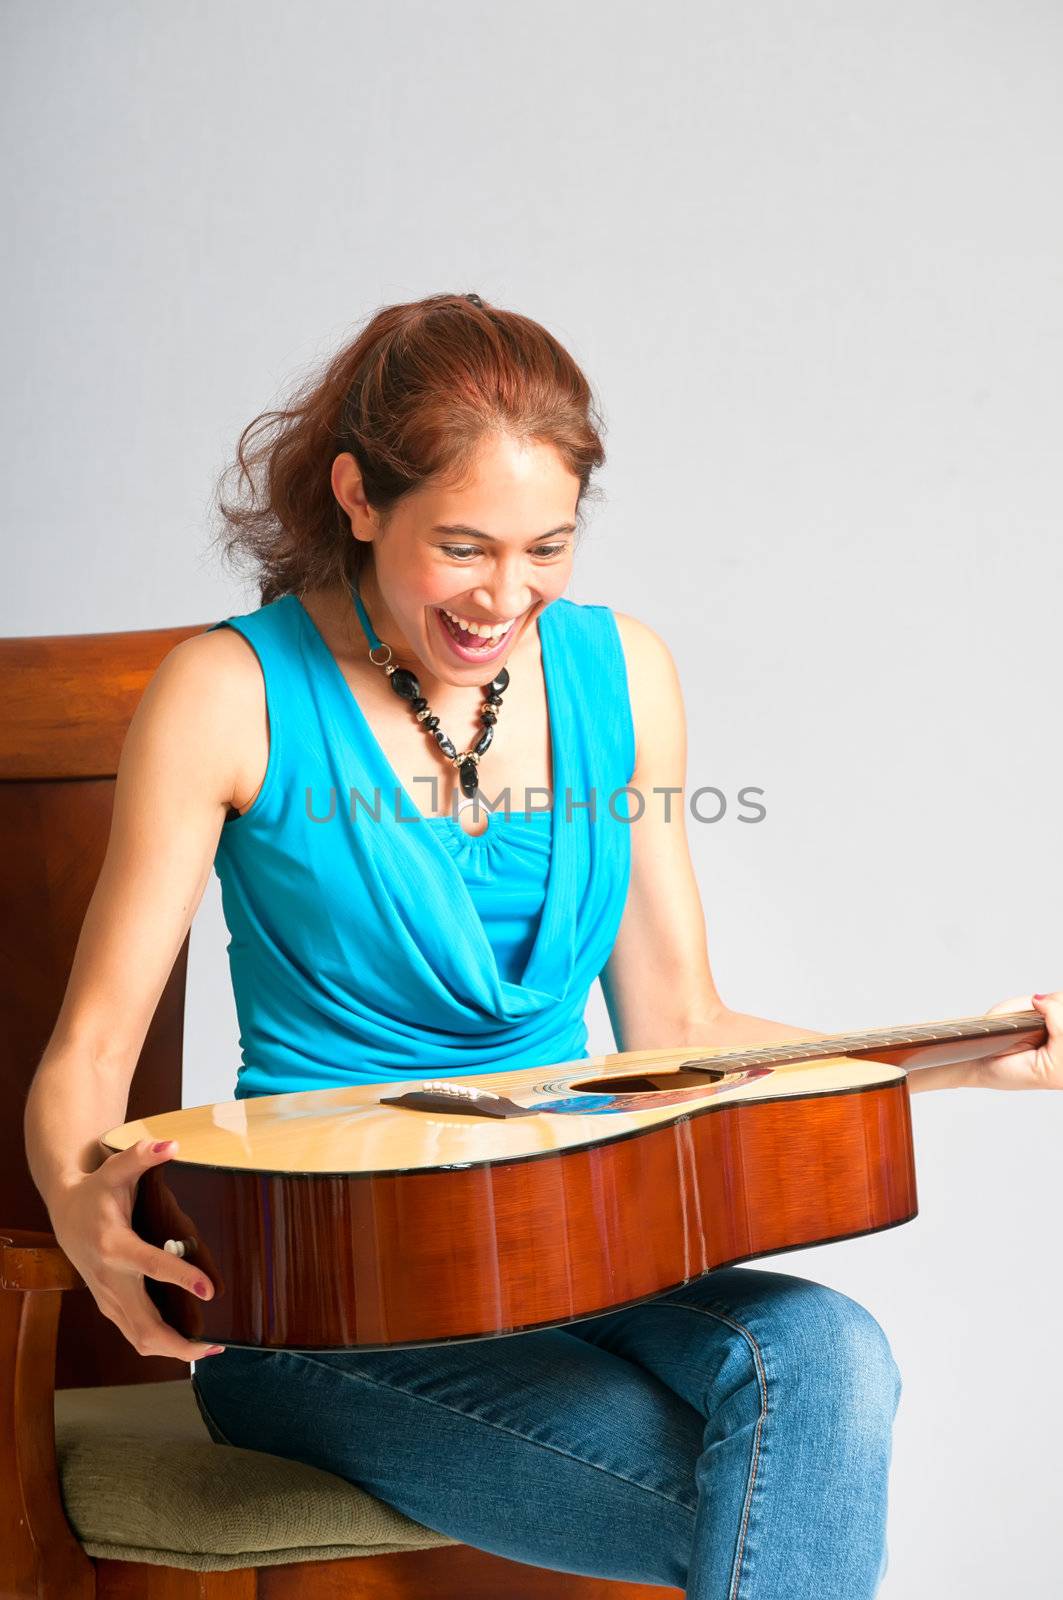 Pretty brunette girl surprised with a guitar as a gift. She shows her happiness and joy.